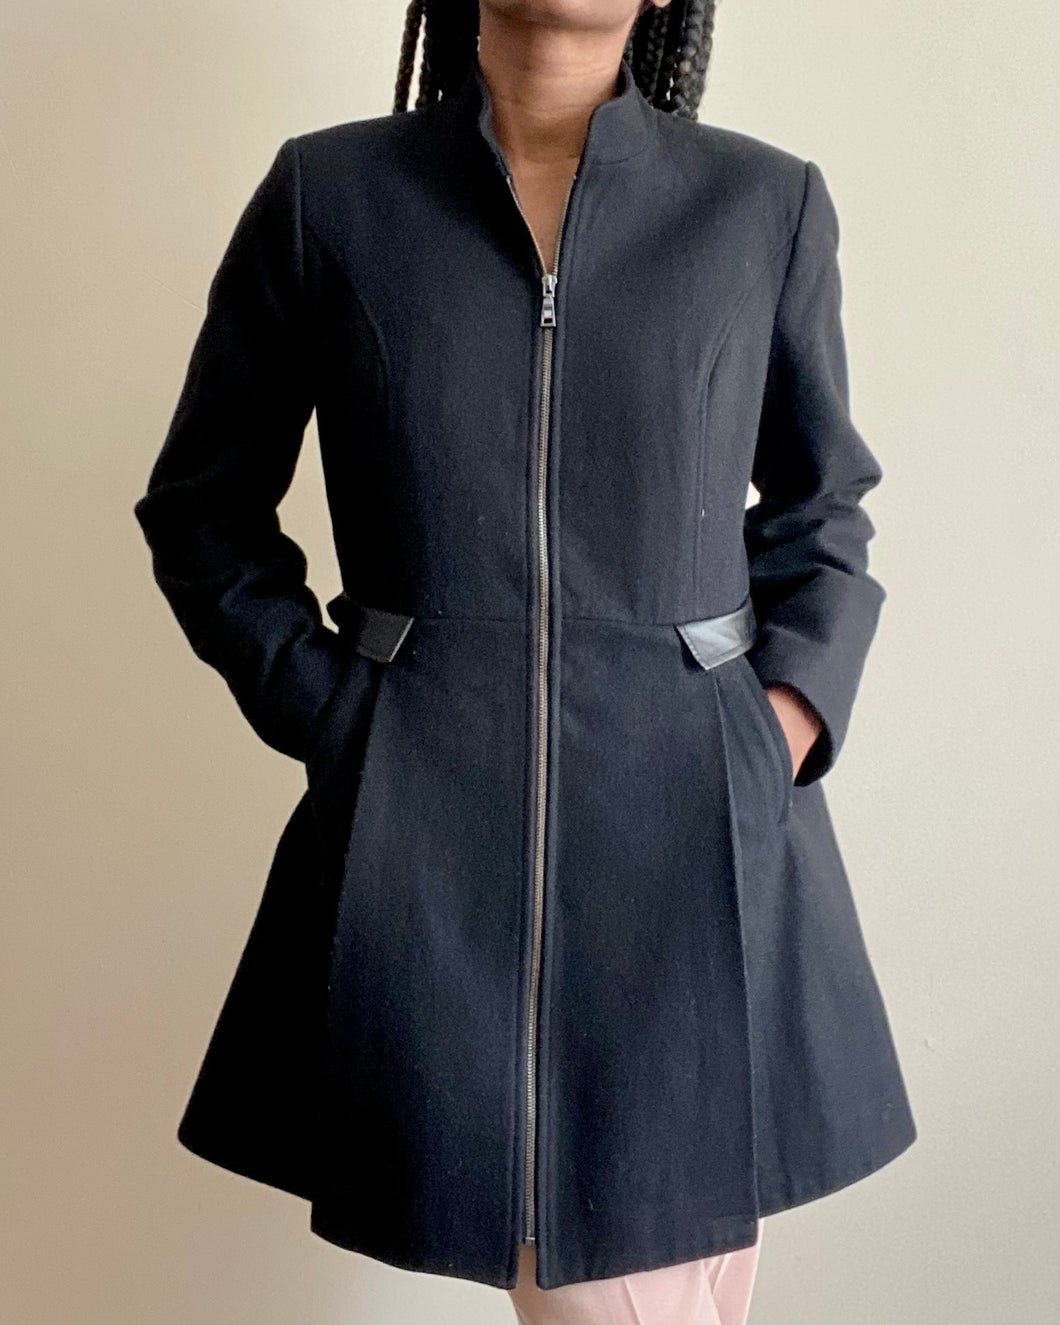 Wool Black Coat With Leather Trim (L)